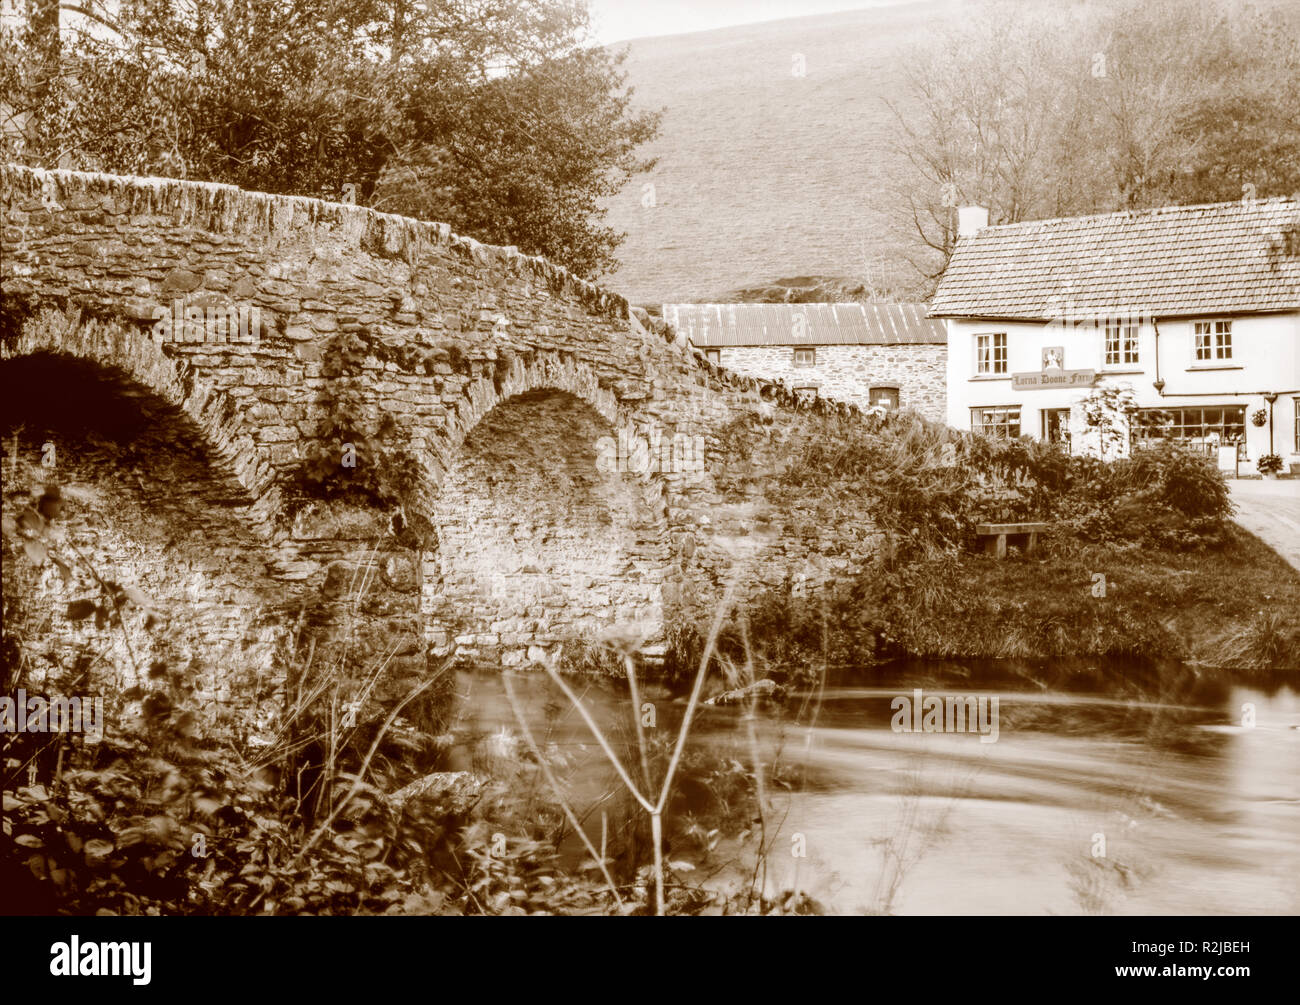 Sepia toned photograph taken on a paper negative in a 7 x 5 inch plate camera in October 2018 of  Lorna Doone Farm at Malmsmead, Devon, Exmoor UK. Stock Photo